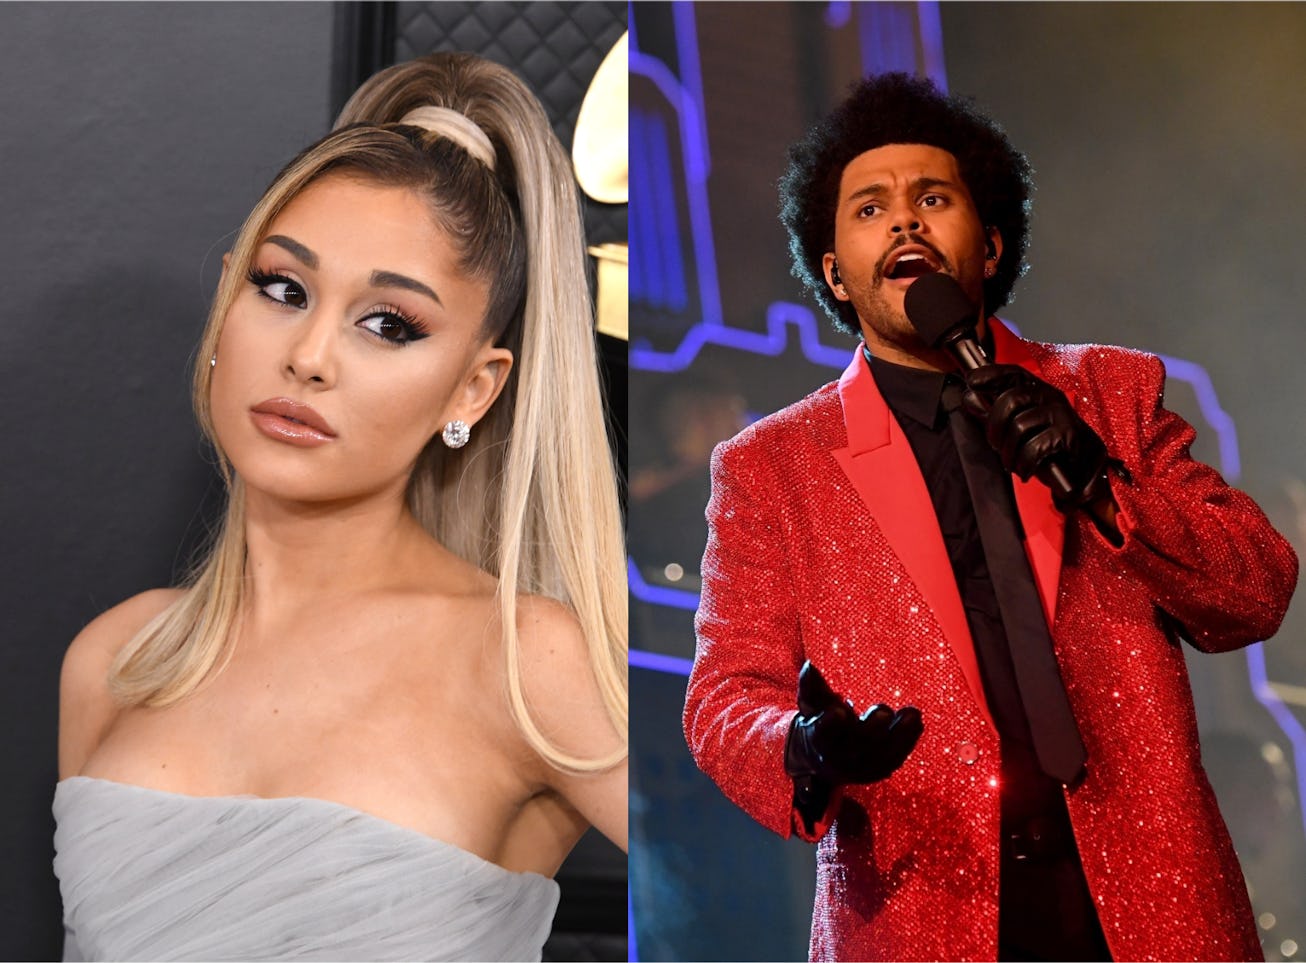 L: A portrait of Ariana Grande at the Grammys. R: A photo of The Weeknd performing at the Super Bowl...